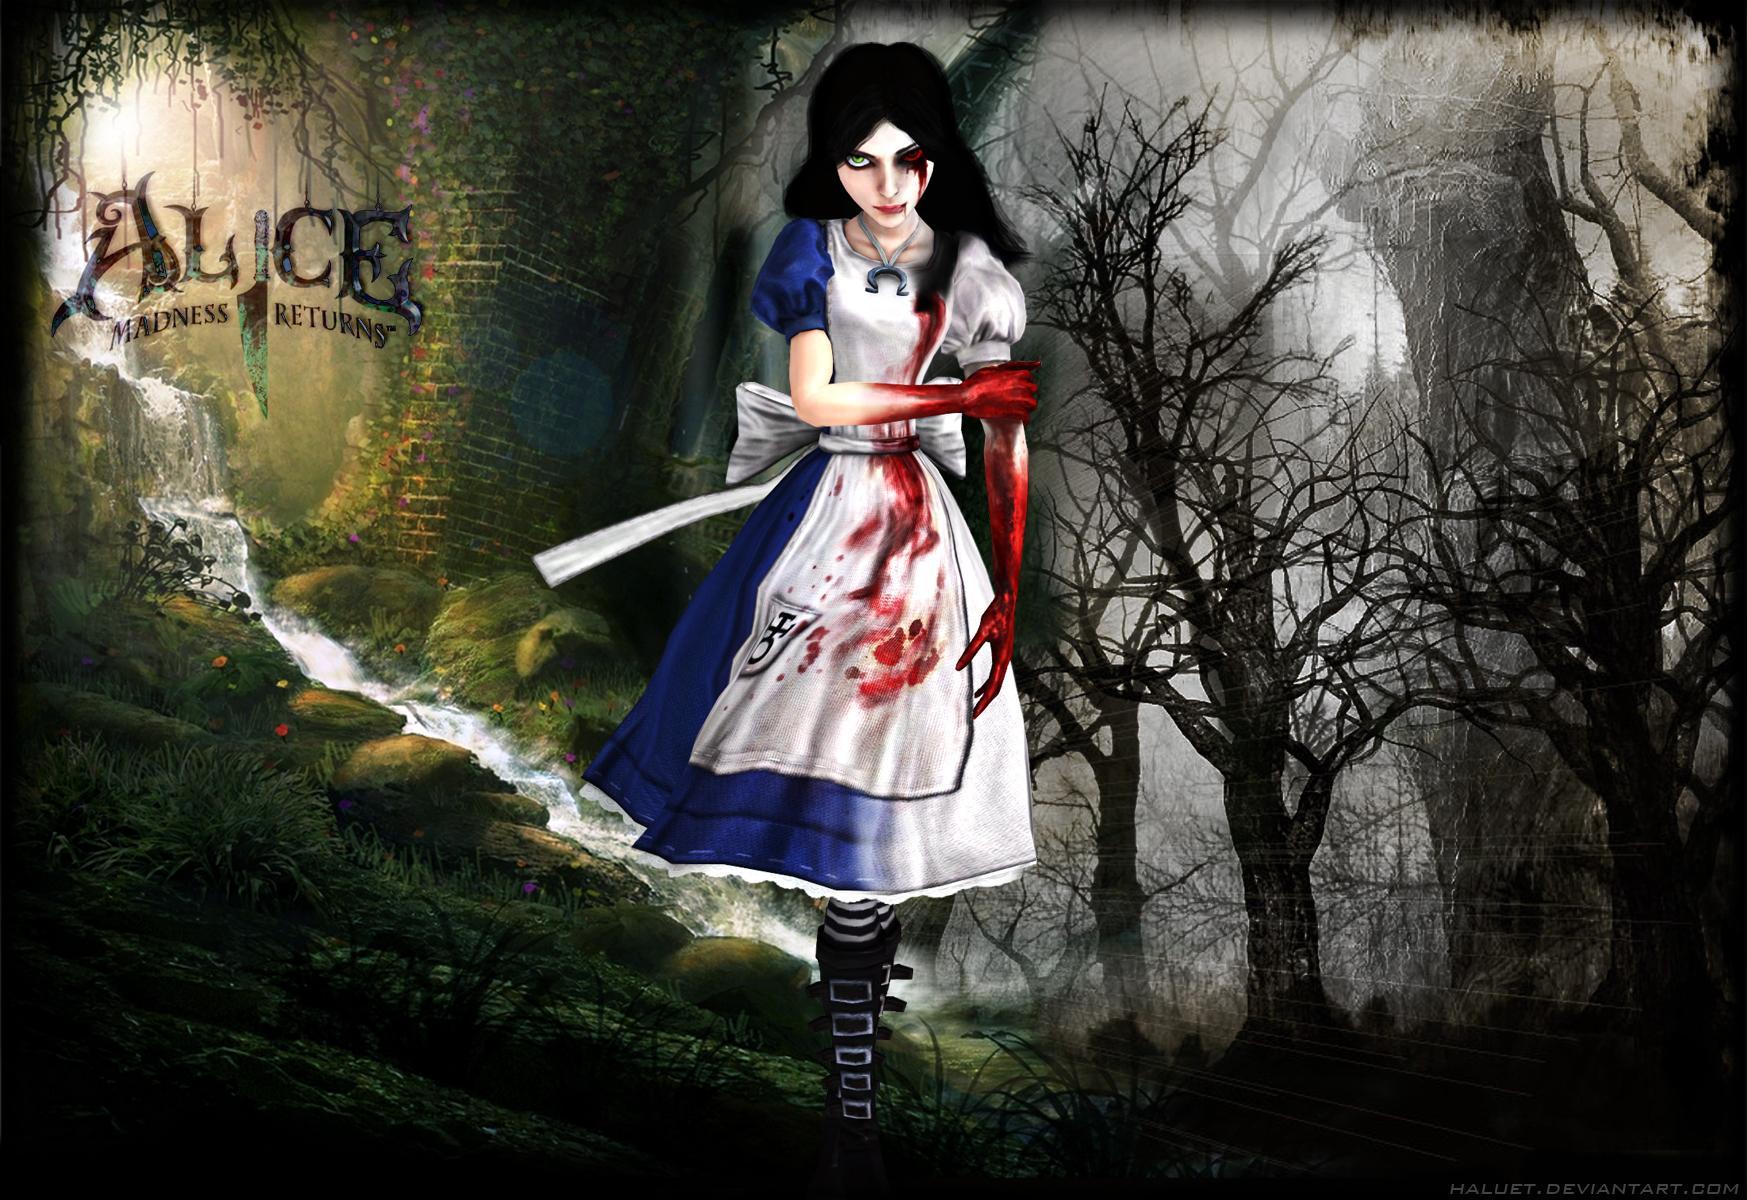 Cute Alice Madness Returns Wallpaper in High Quality, Jowita